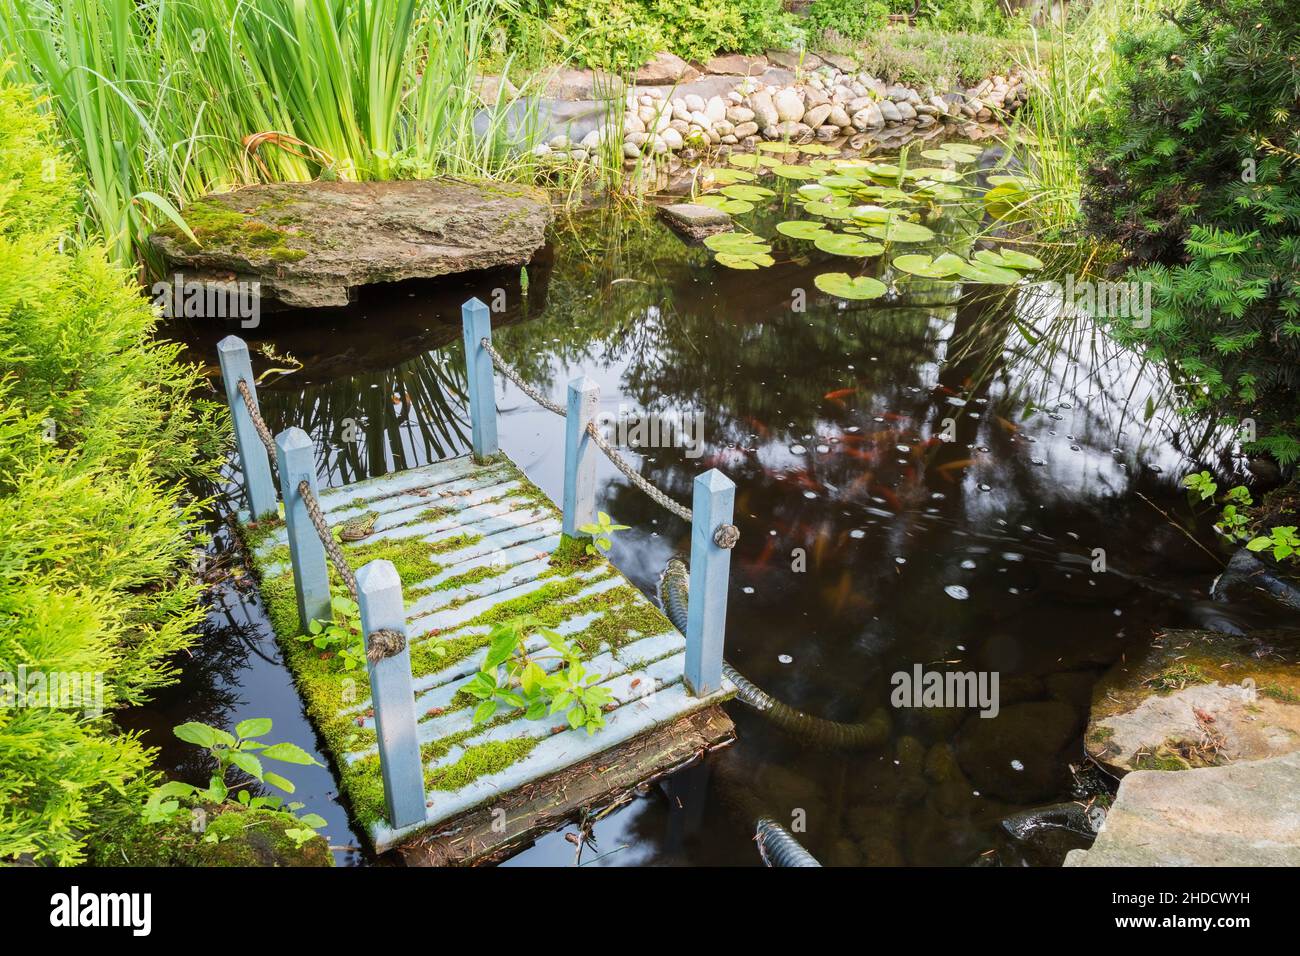 Pond with floating blue painted miniature wooden footbridge, Iris pseudacorus - Yellow Flag, Nymphaea - Waterlilly in front yard garden in summer. Stock Photo